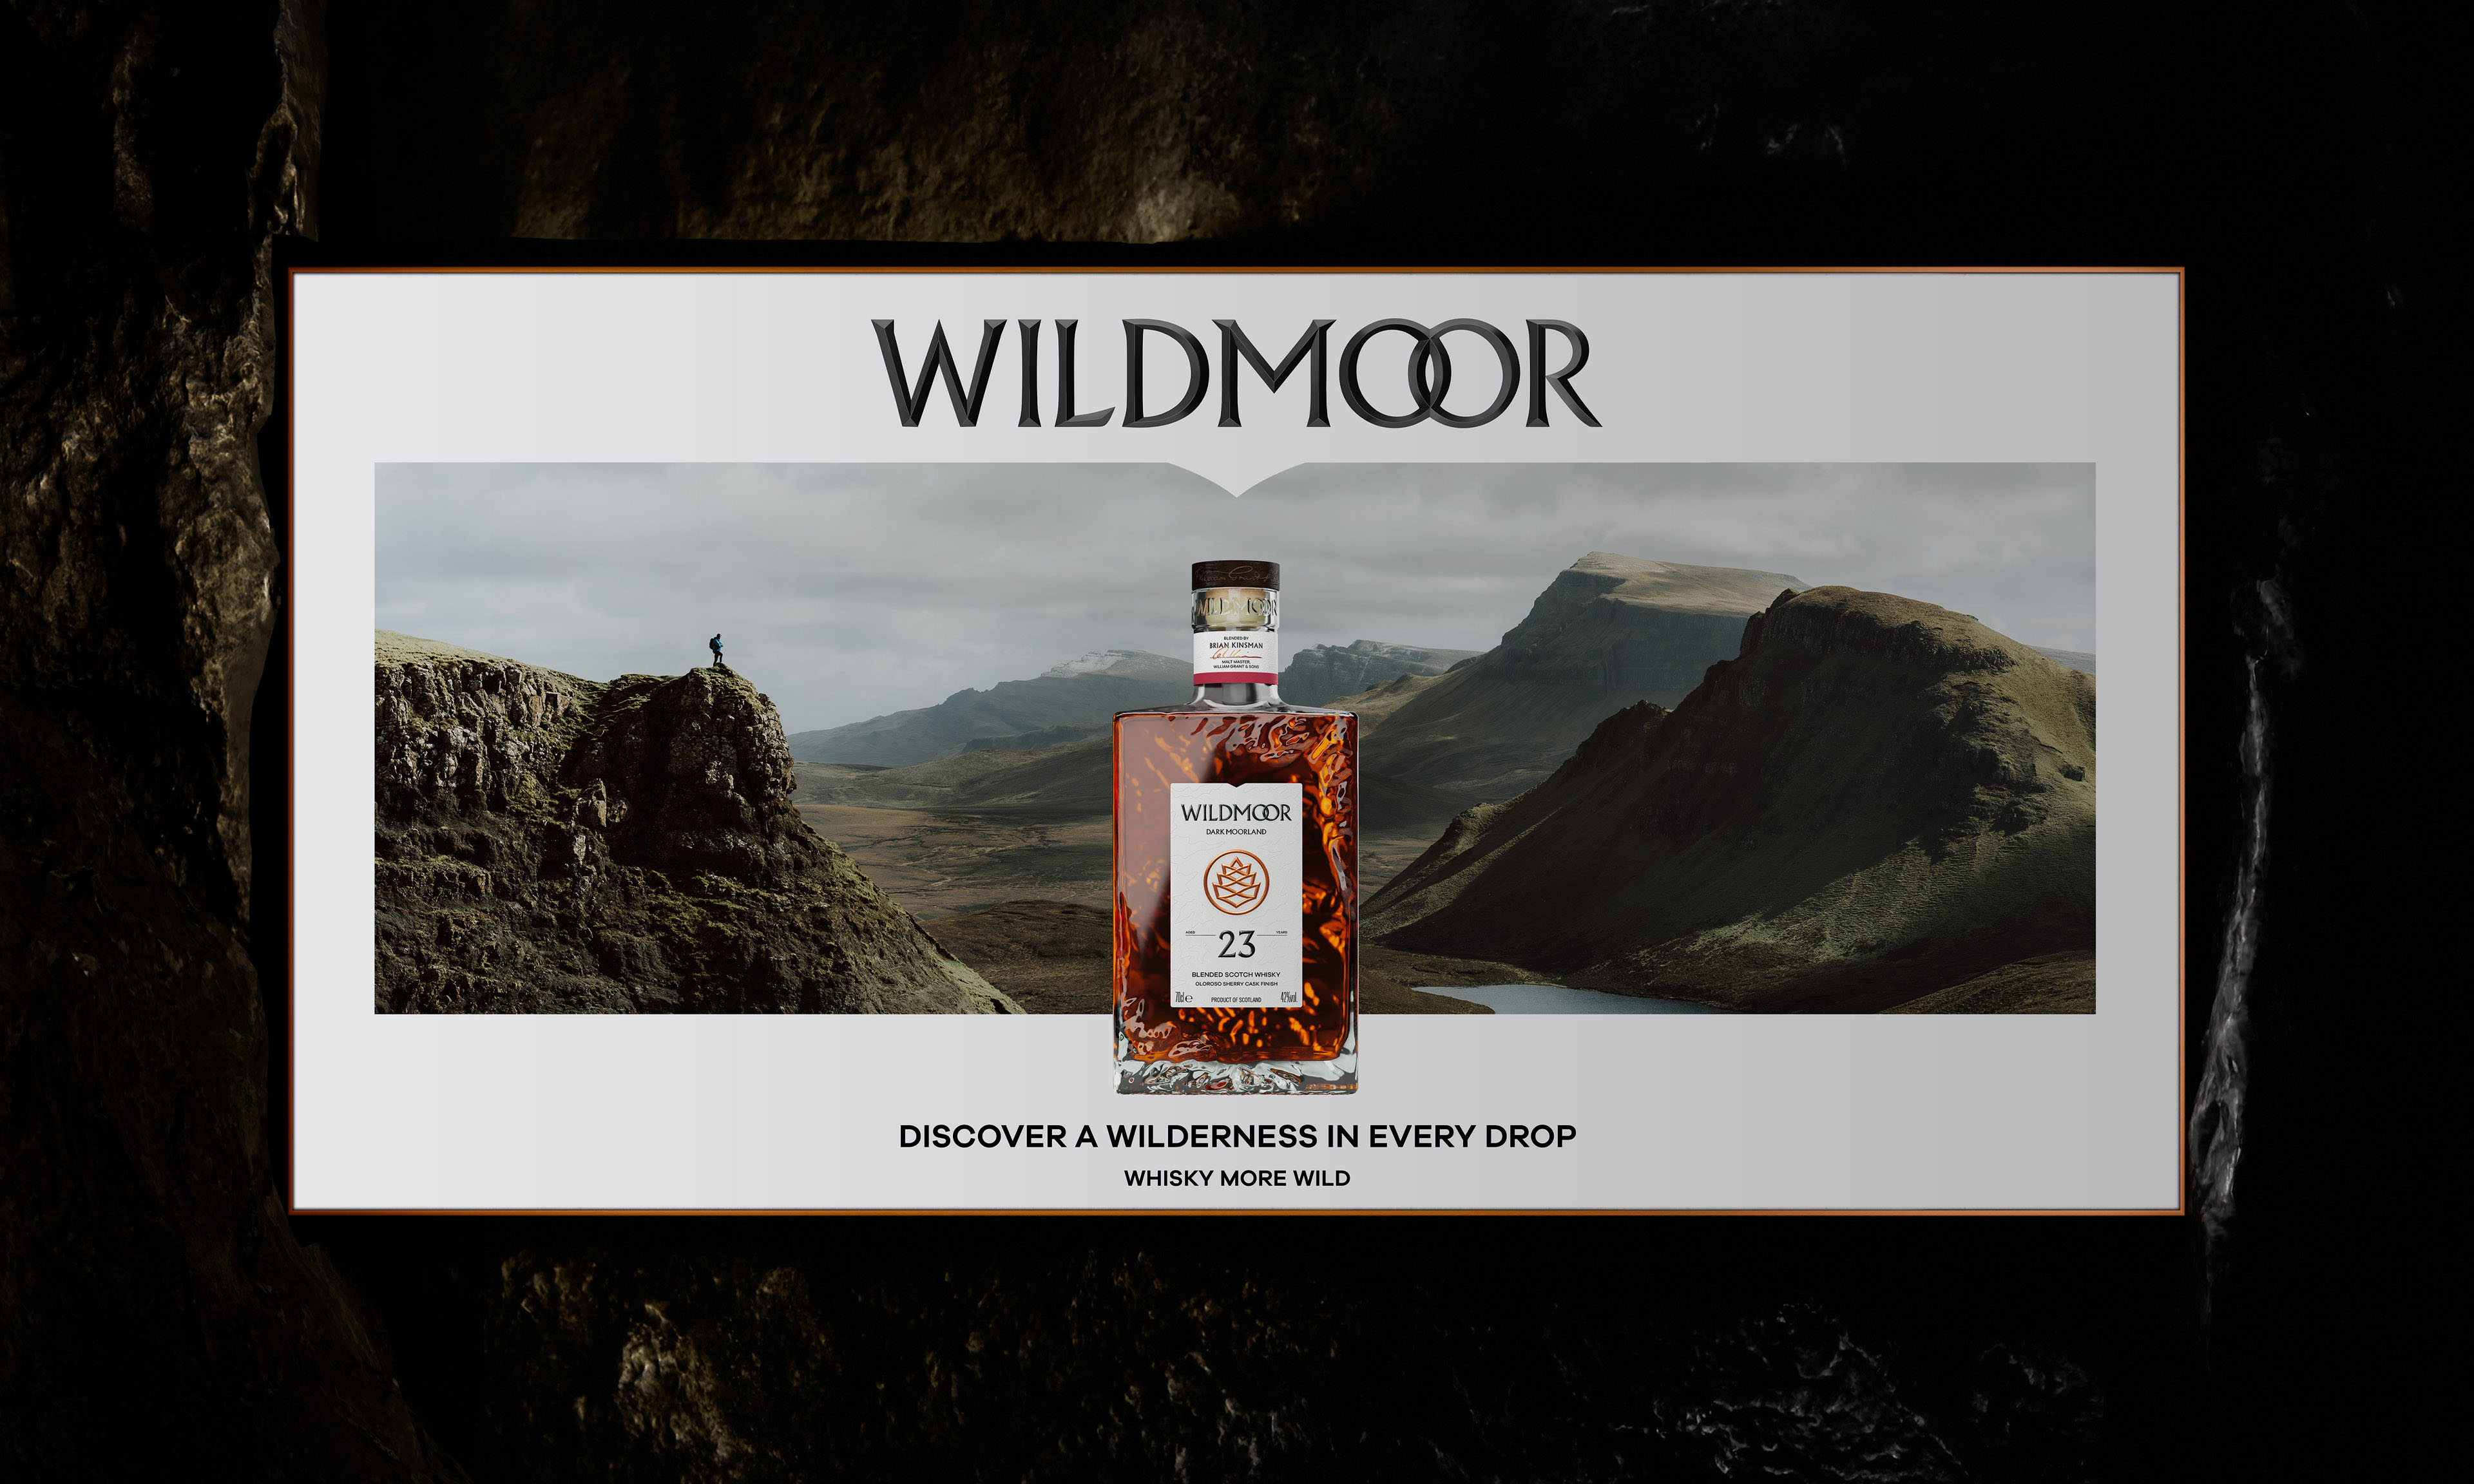 Whisky Gets Wilder: LOVE Captures Scotland’s Rugged Beauty in new Launch for William Grant & Sons